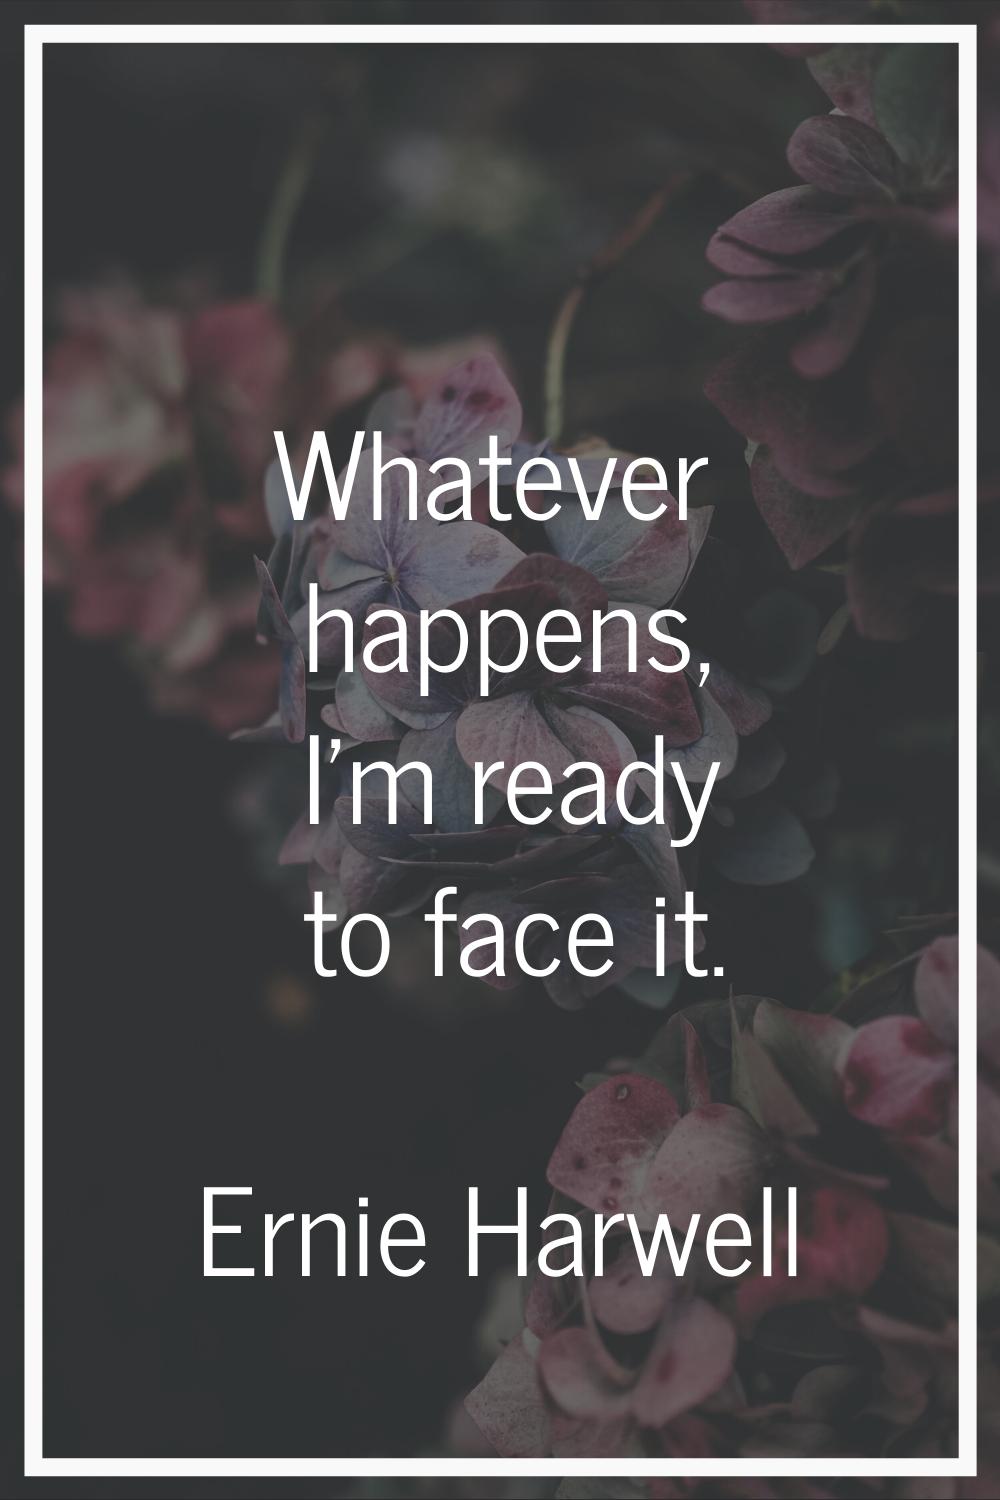 Whatever happens, I'm ready to face it.